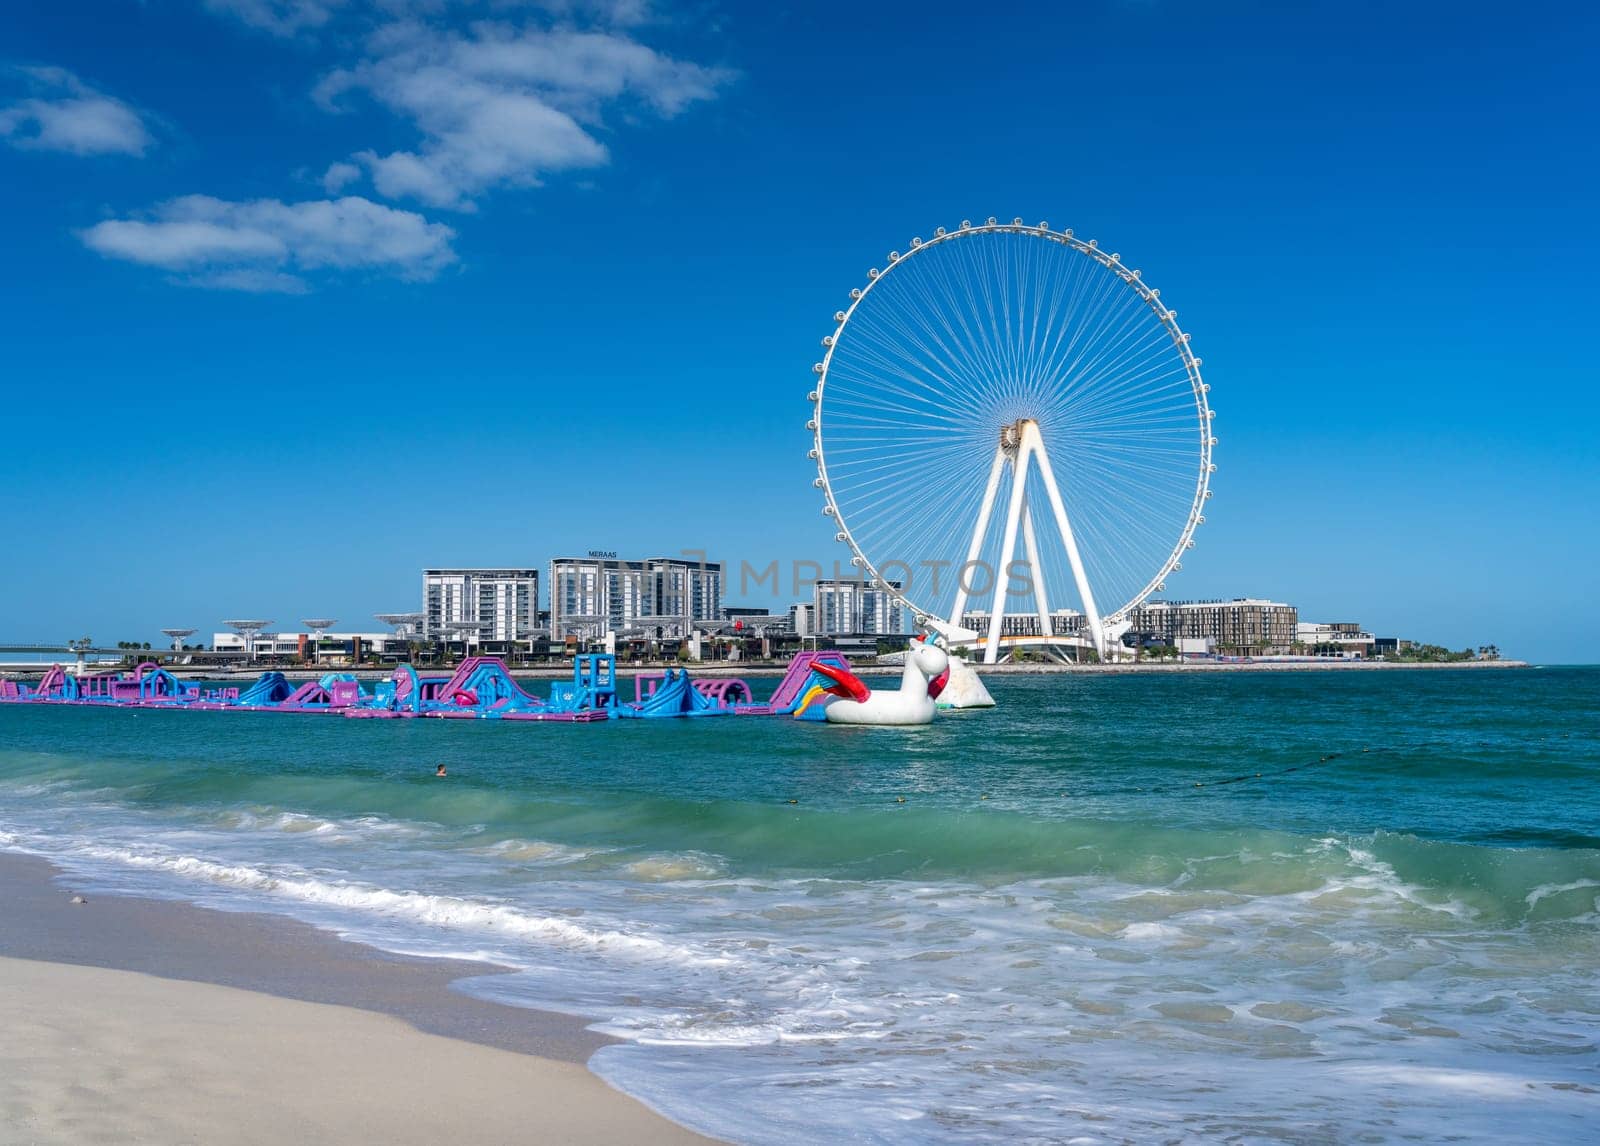 Early morning view of Ain Dubai Observation Wheel on BlueWaters Island off the coast by JBR beach